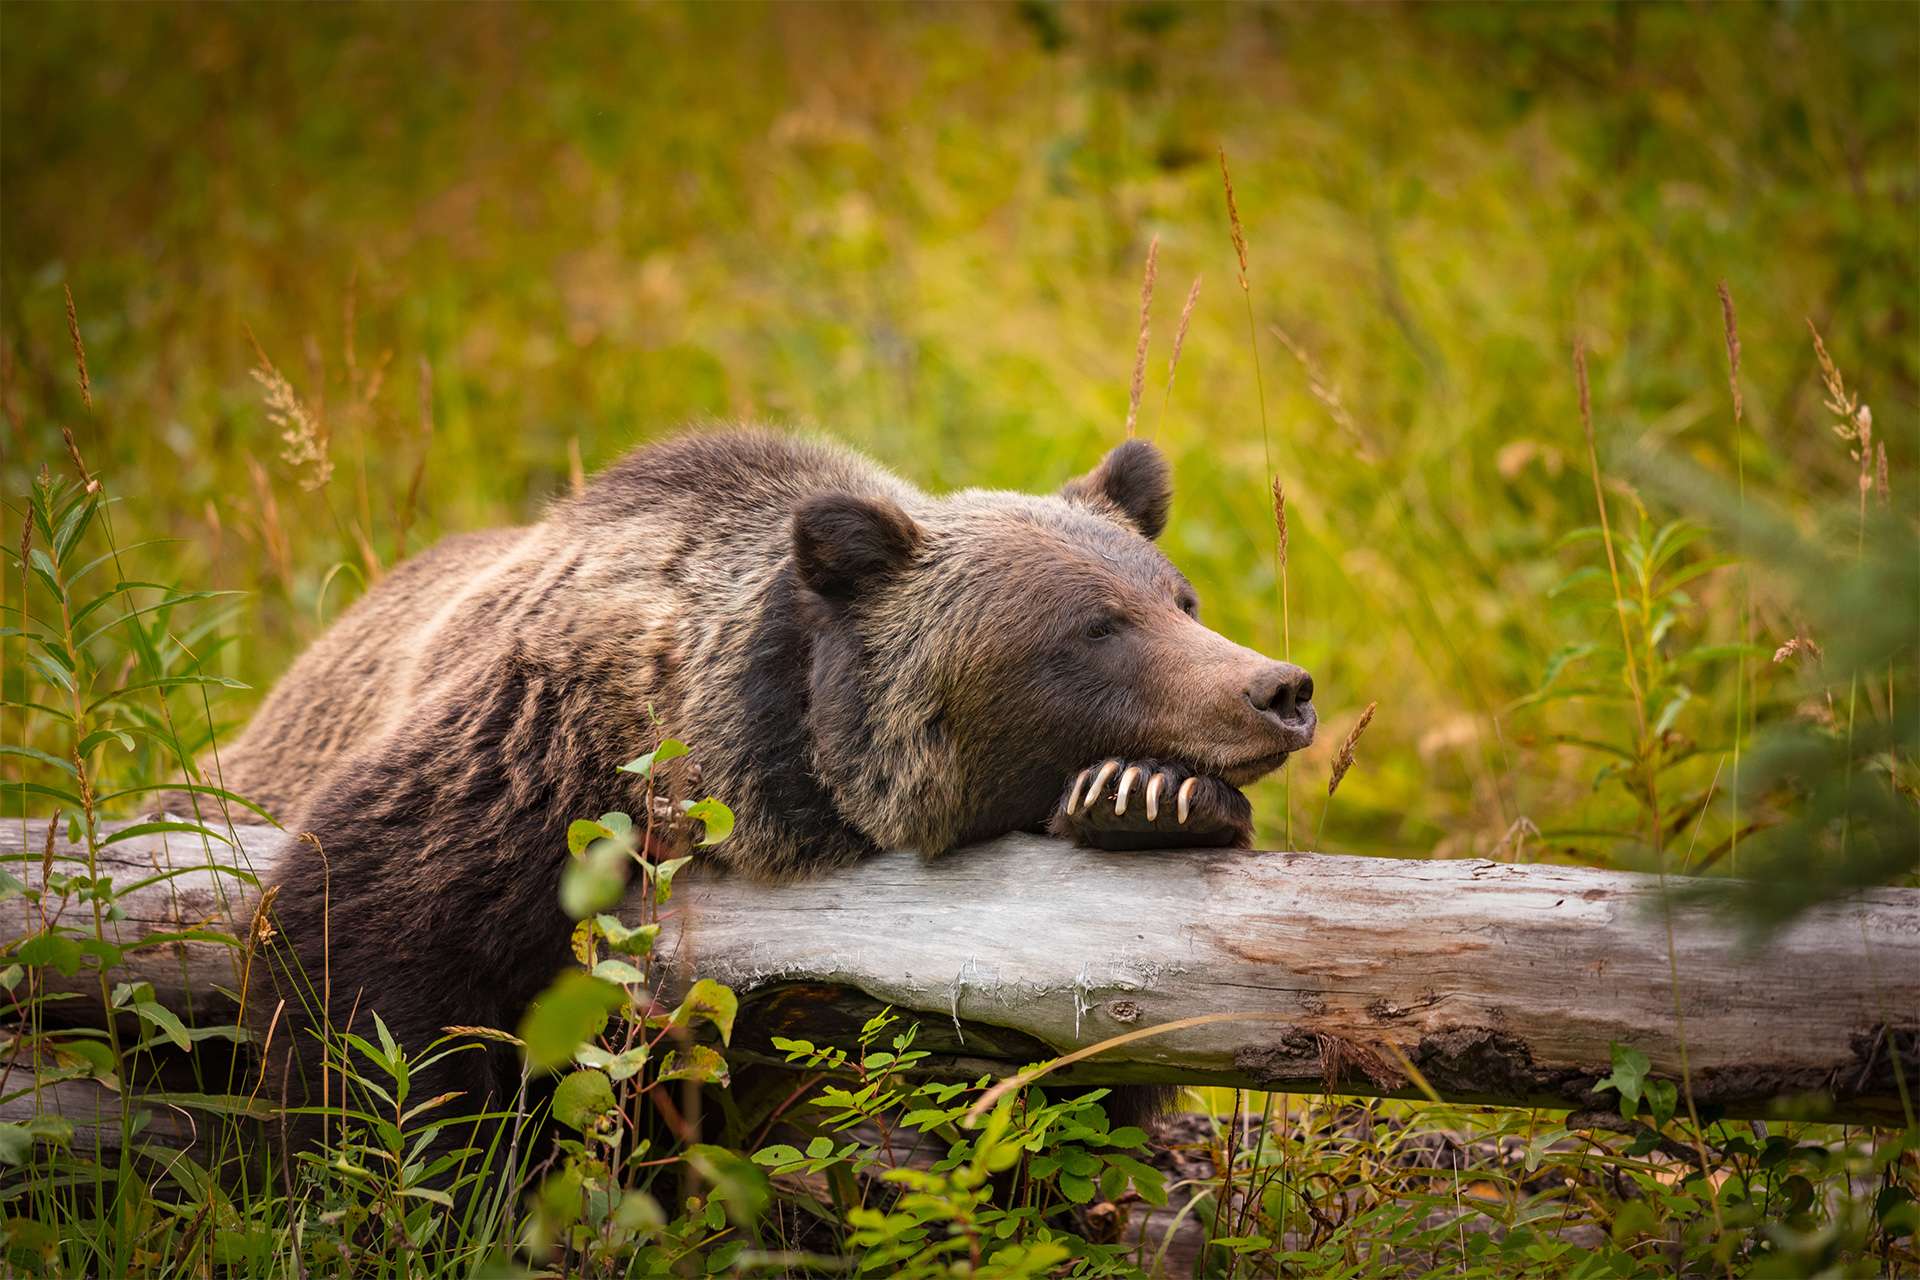 Wild Eastern Slopes Grizzly bear taking a rest in a mountain forest in summer Banff National Park Alberta Canada TeamJiX